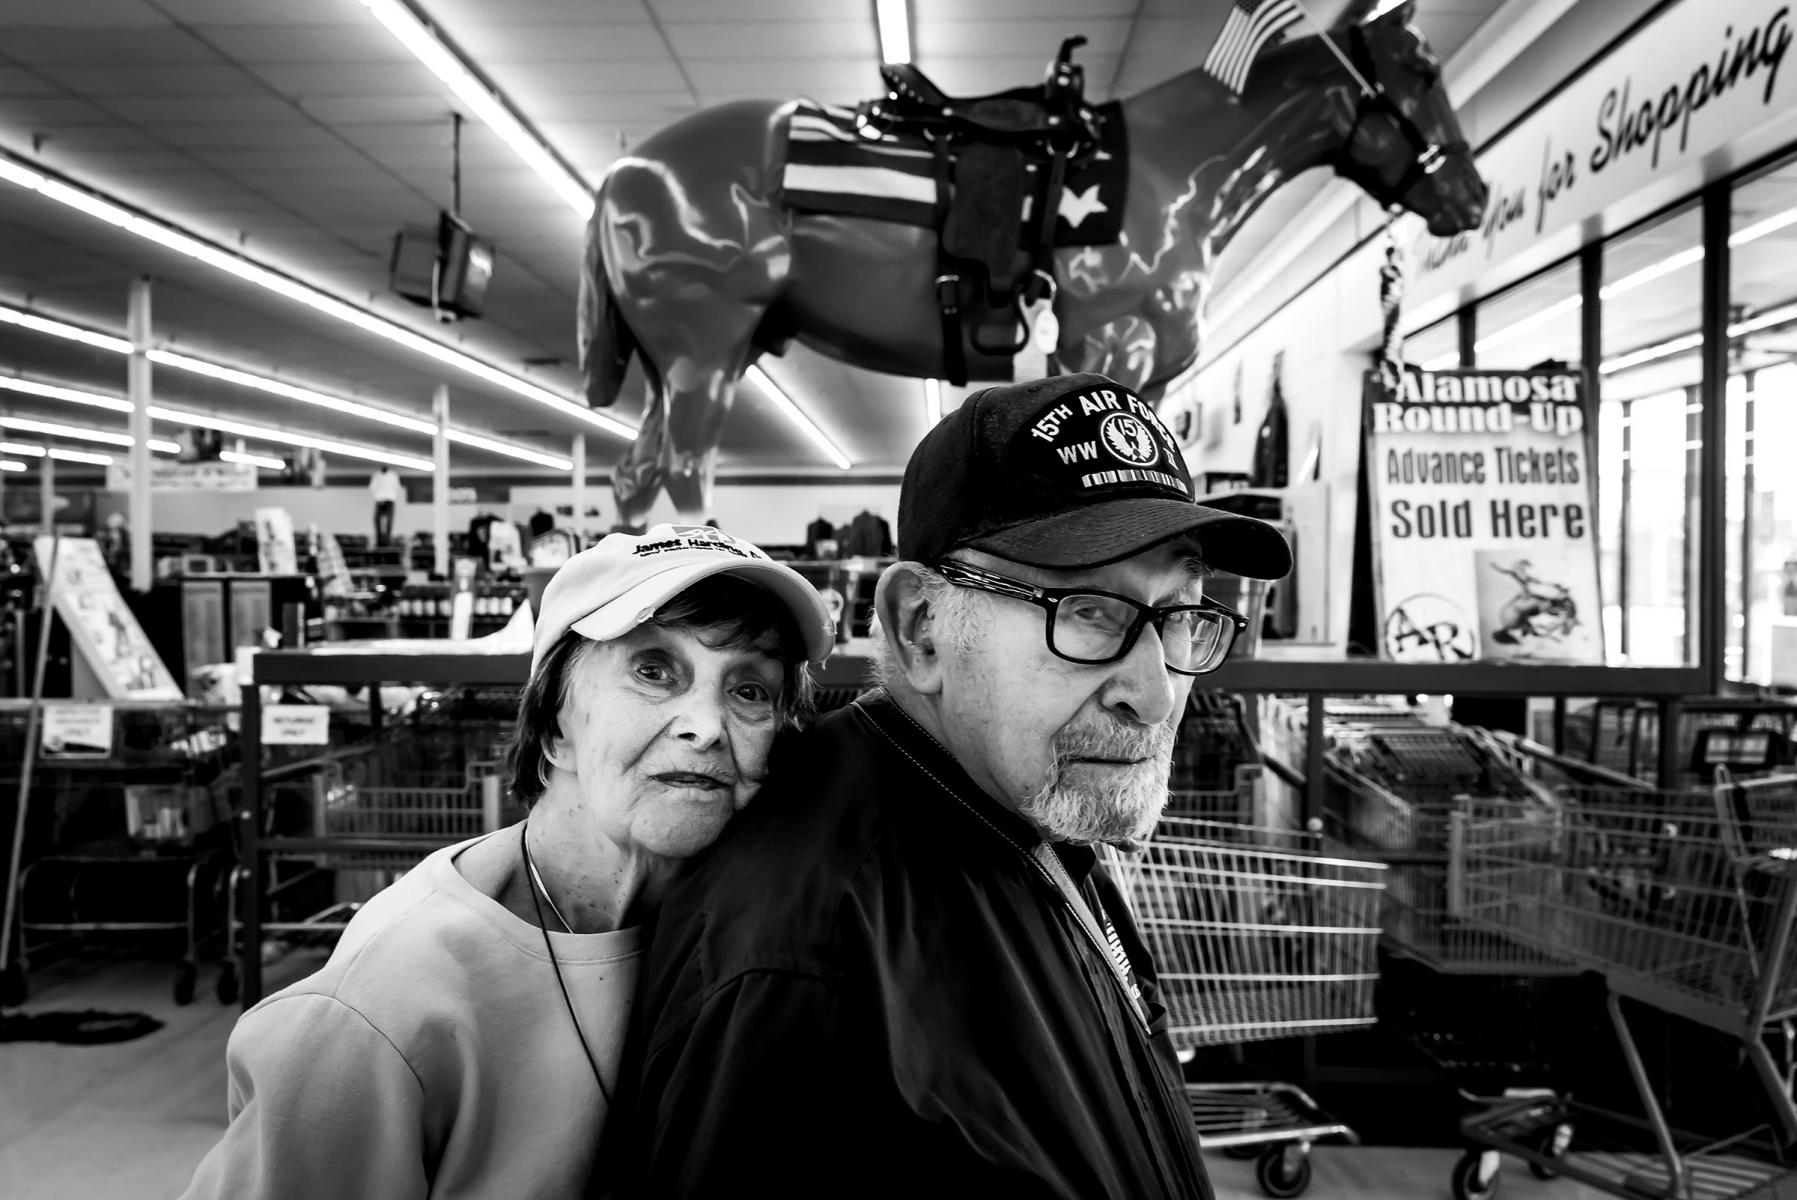 Richard and mom shopping in Monte Vista, CO. : Visiting Mom : New York City based photographer and video specializing in portrait corporate portraits, video, editorial stories for on location and architectural photography